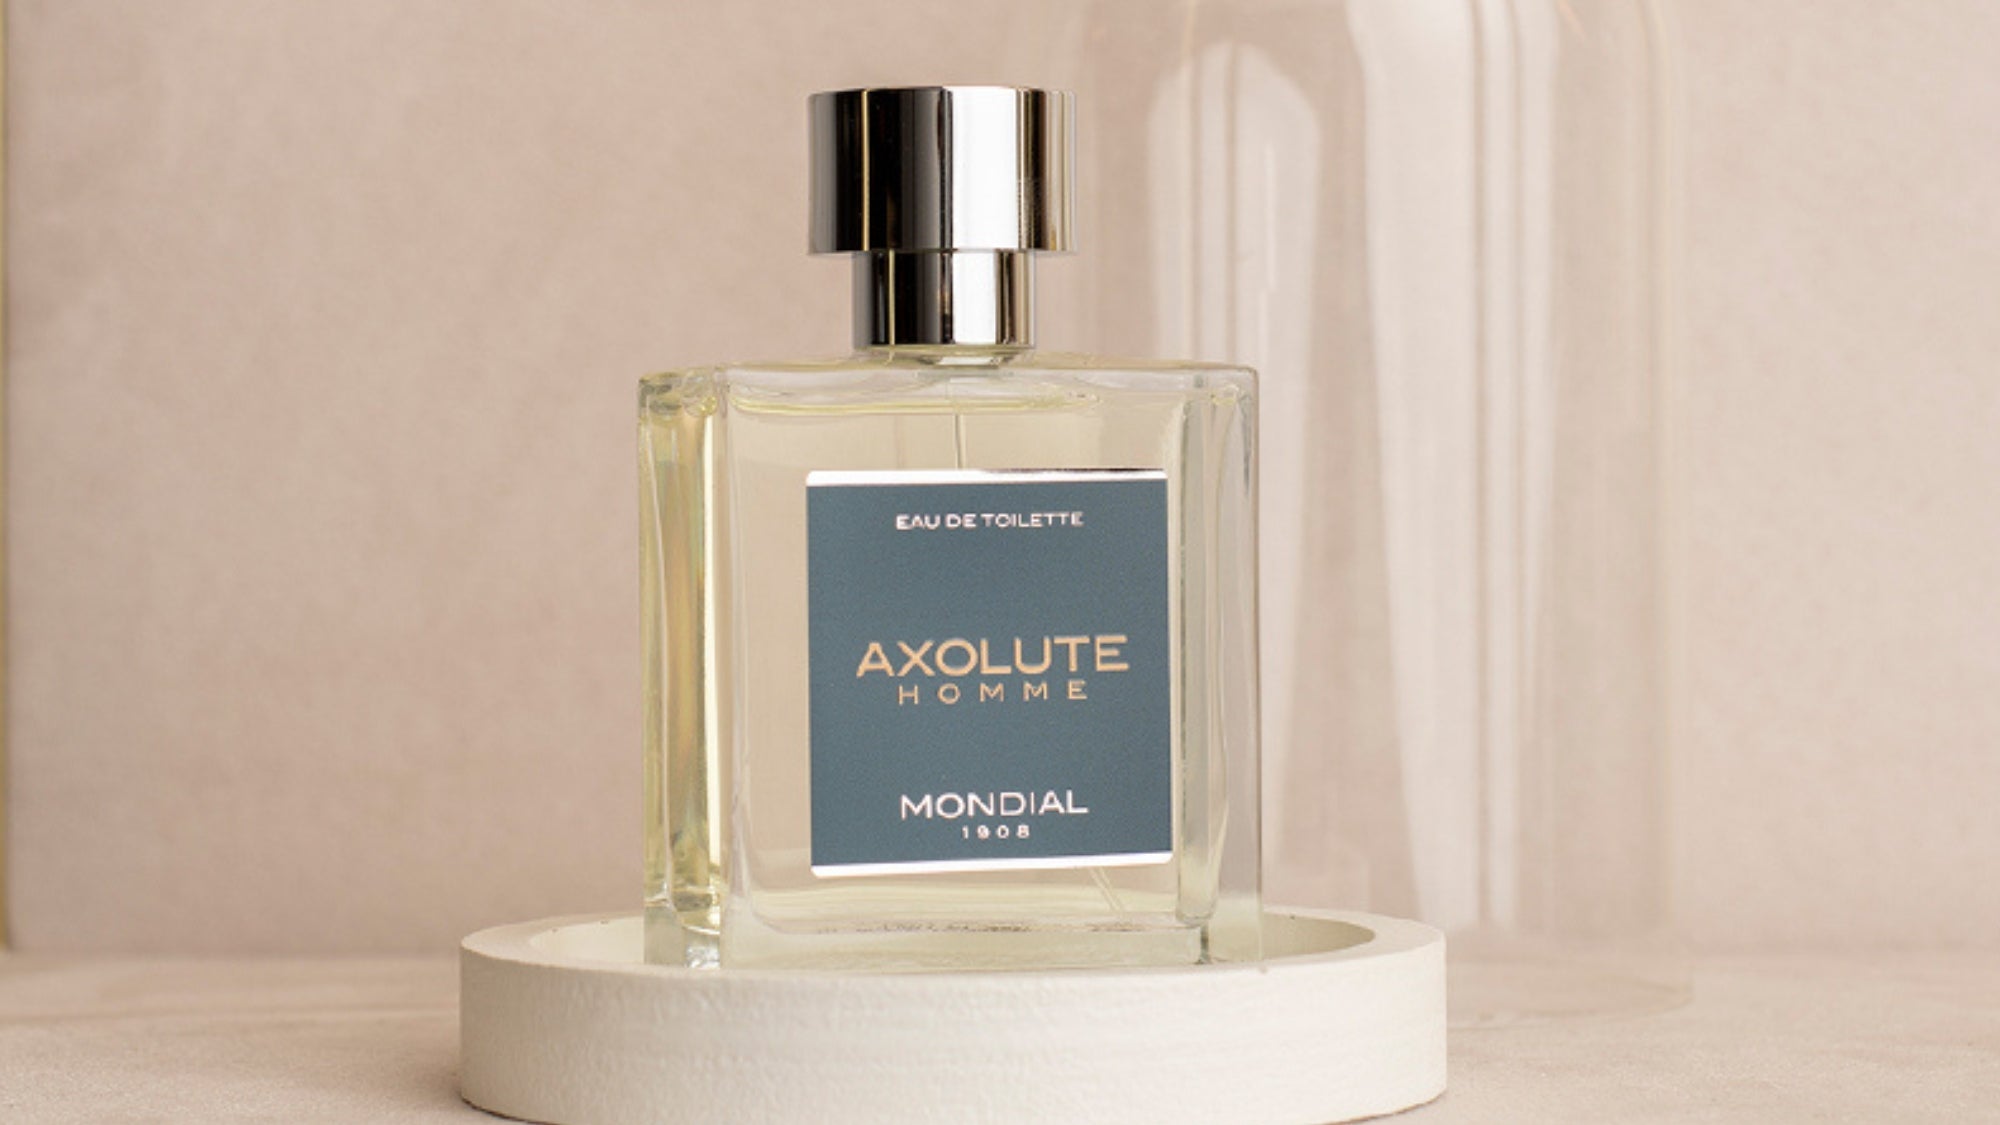 The Axolute Homme Collection